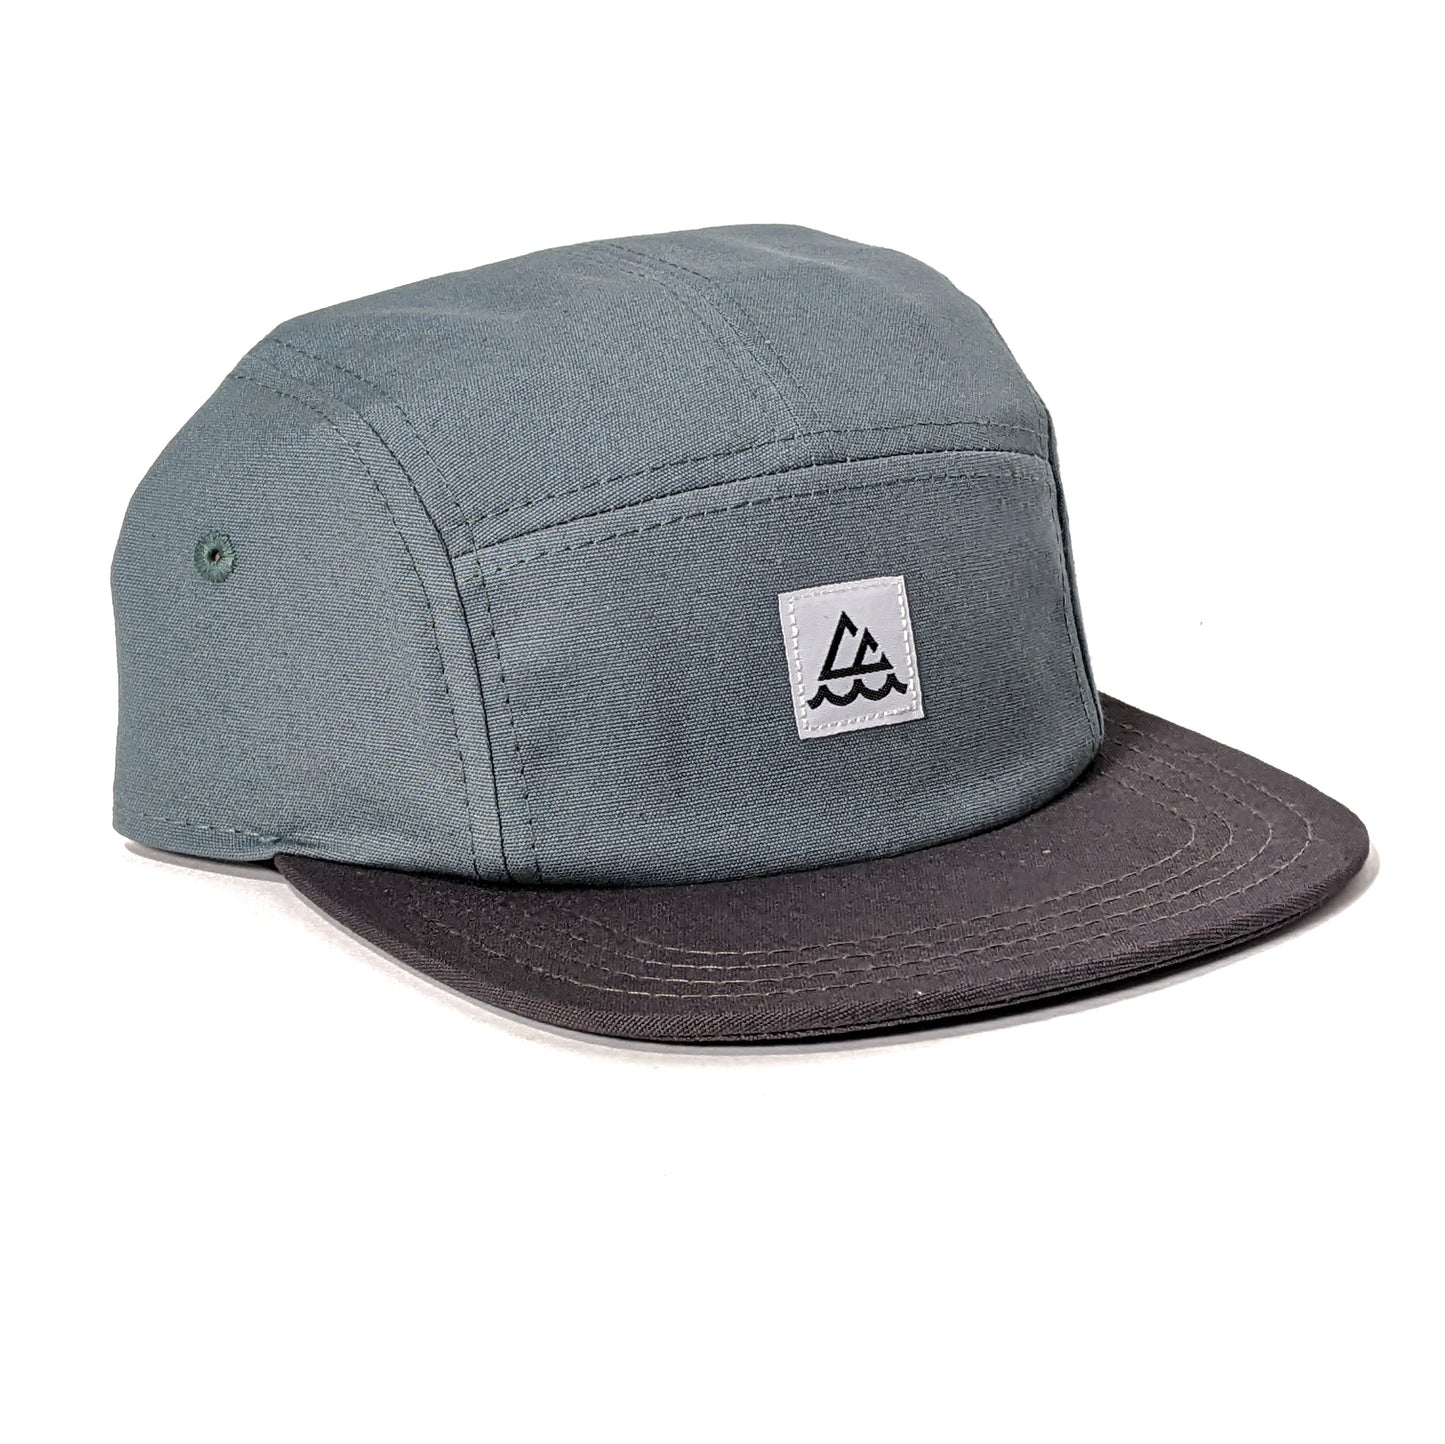 INLET CAMP HAT